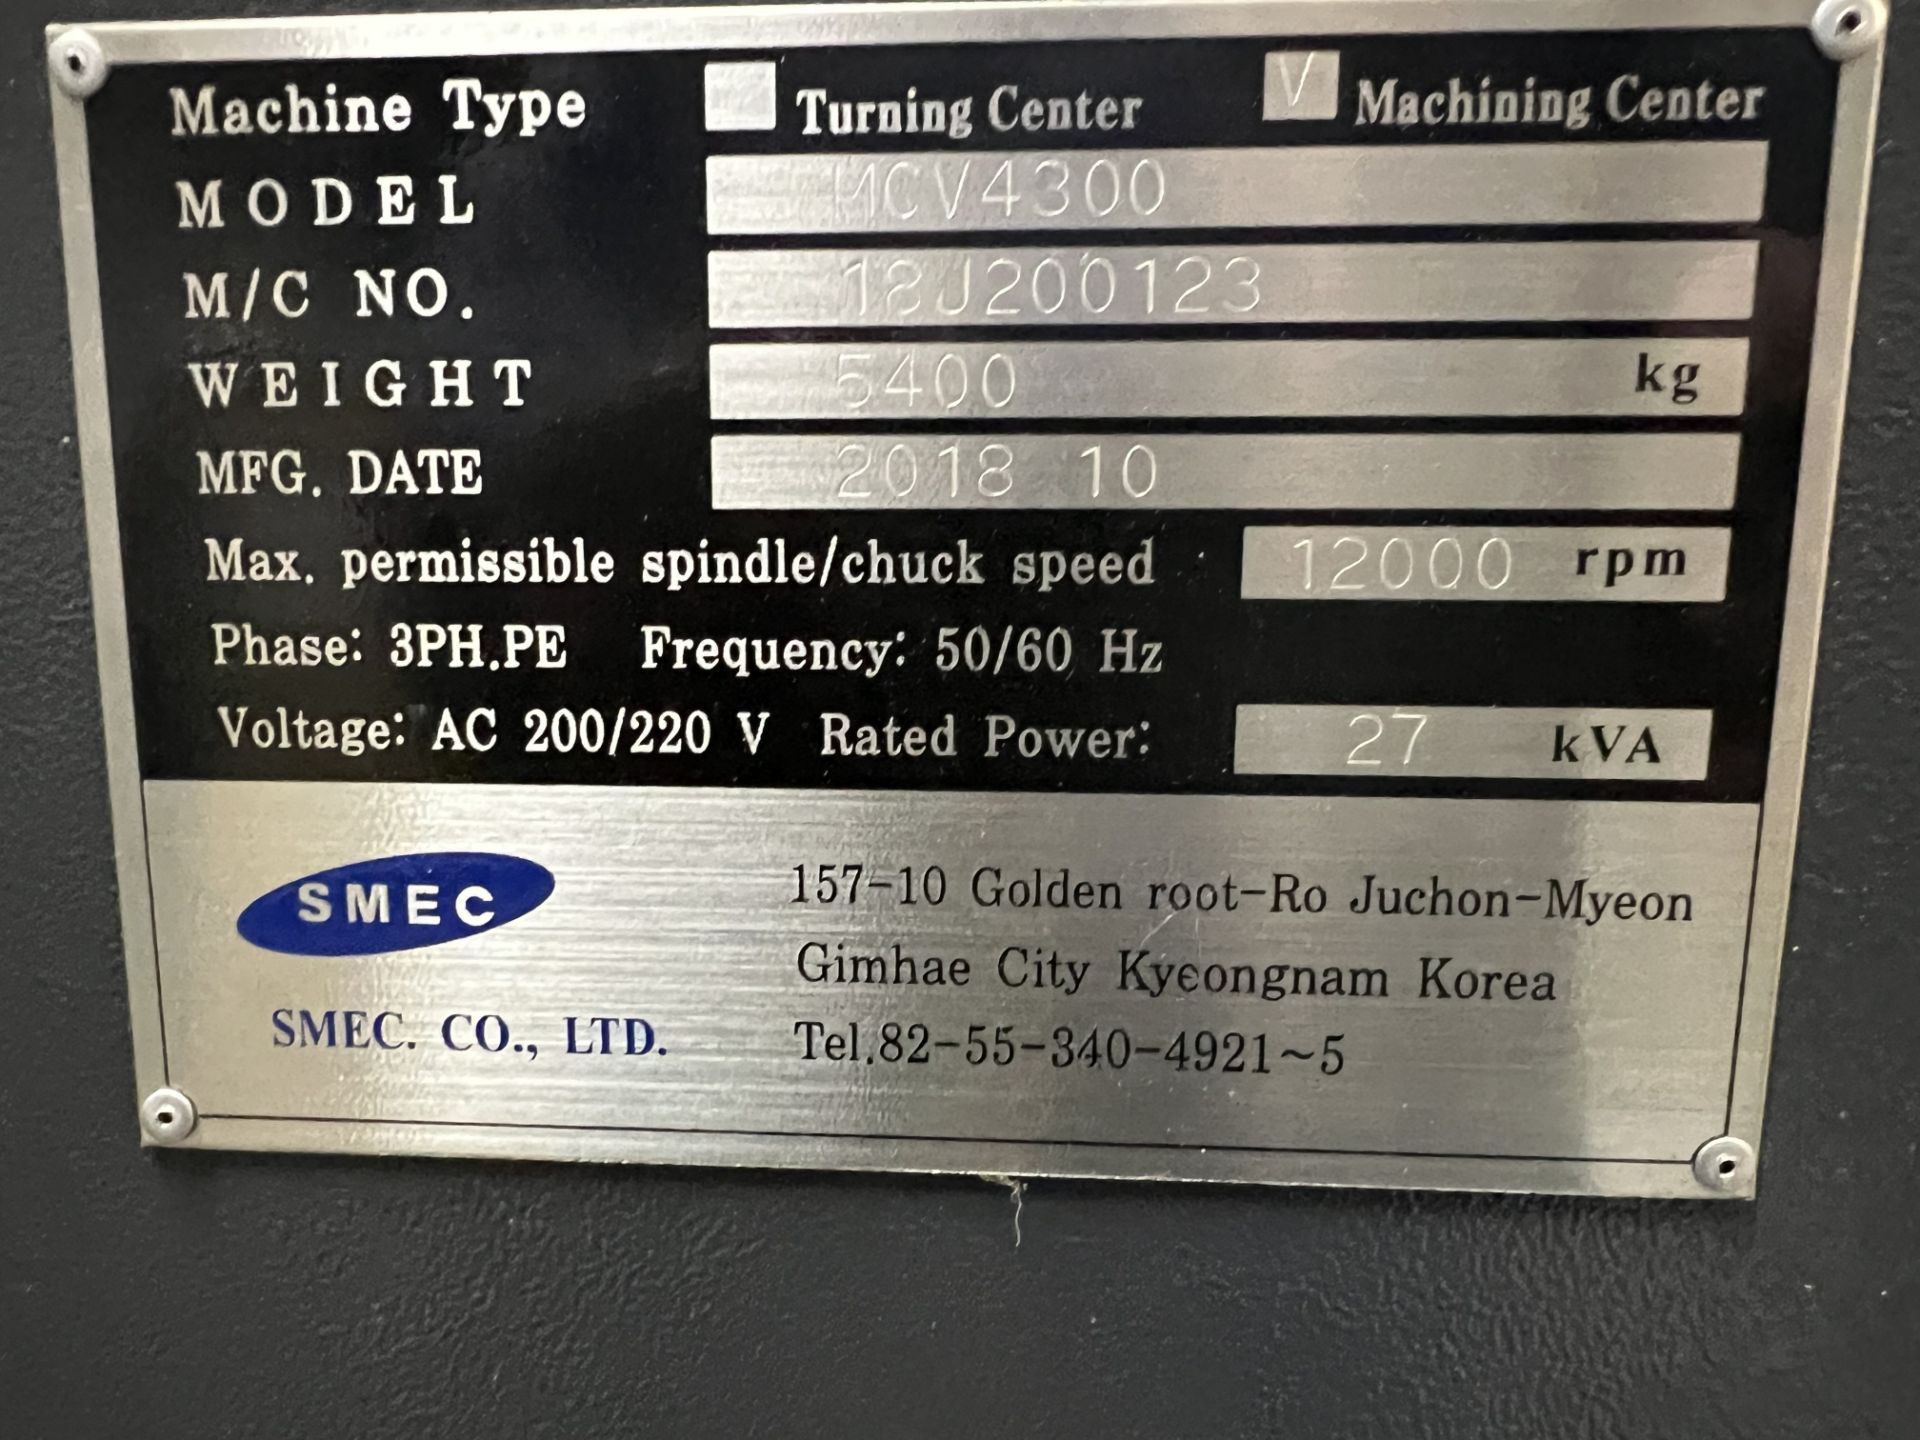 SMEC (SAMSUNG) MCV-4300 3-AXIS CNC VERTICAL MACHINING CENTER, S/N 18J200123, NEW 2018 - Image 6 of 7